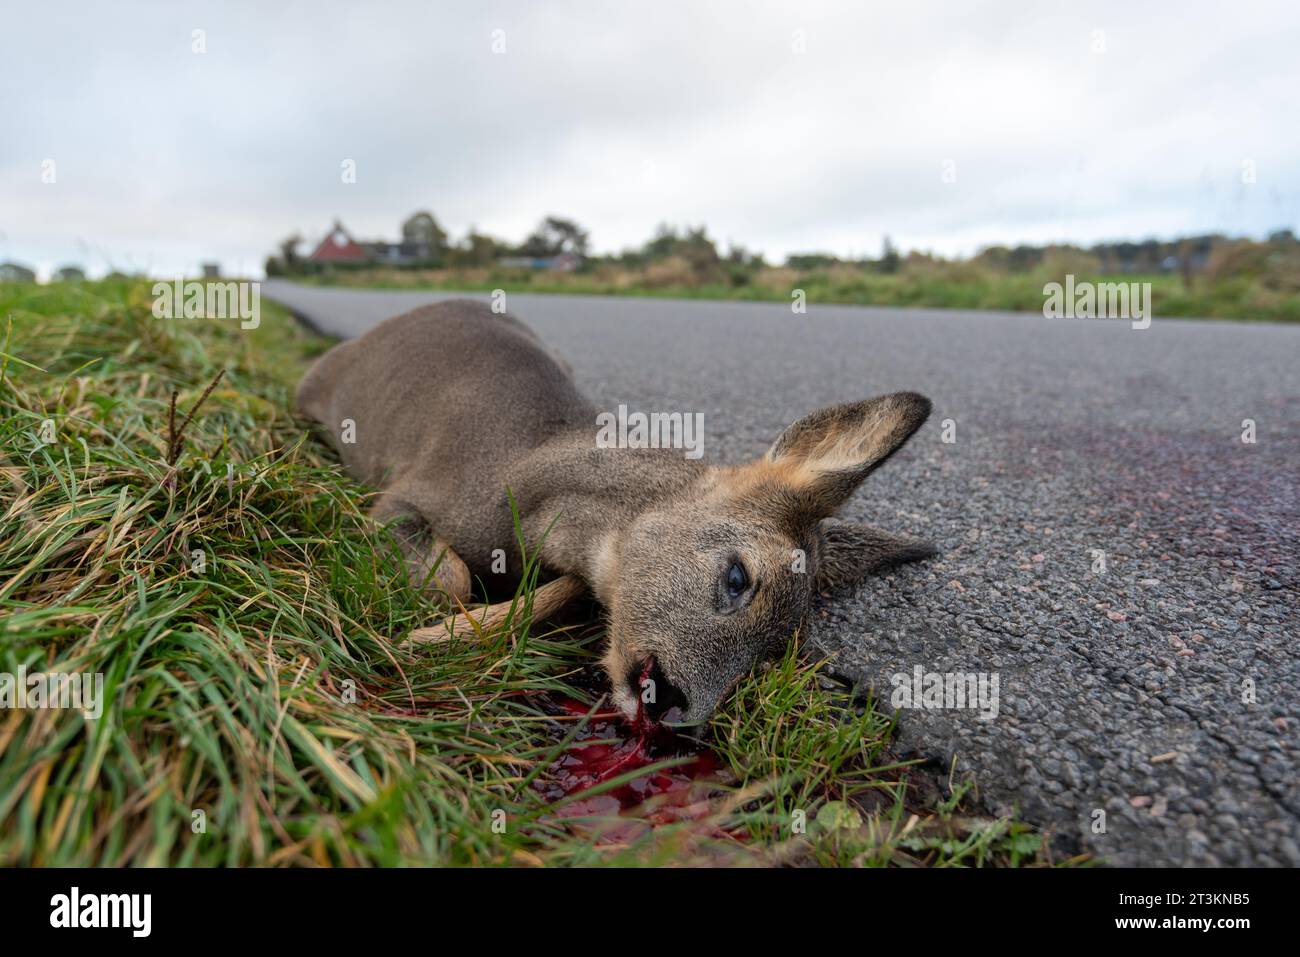 Carcass of a deer lies on a country road, wild accident Stock Photo